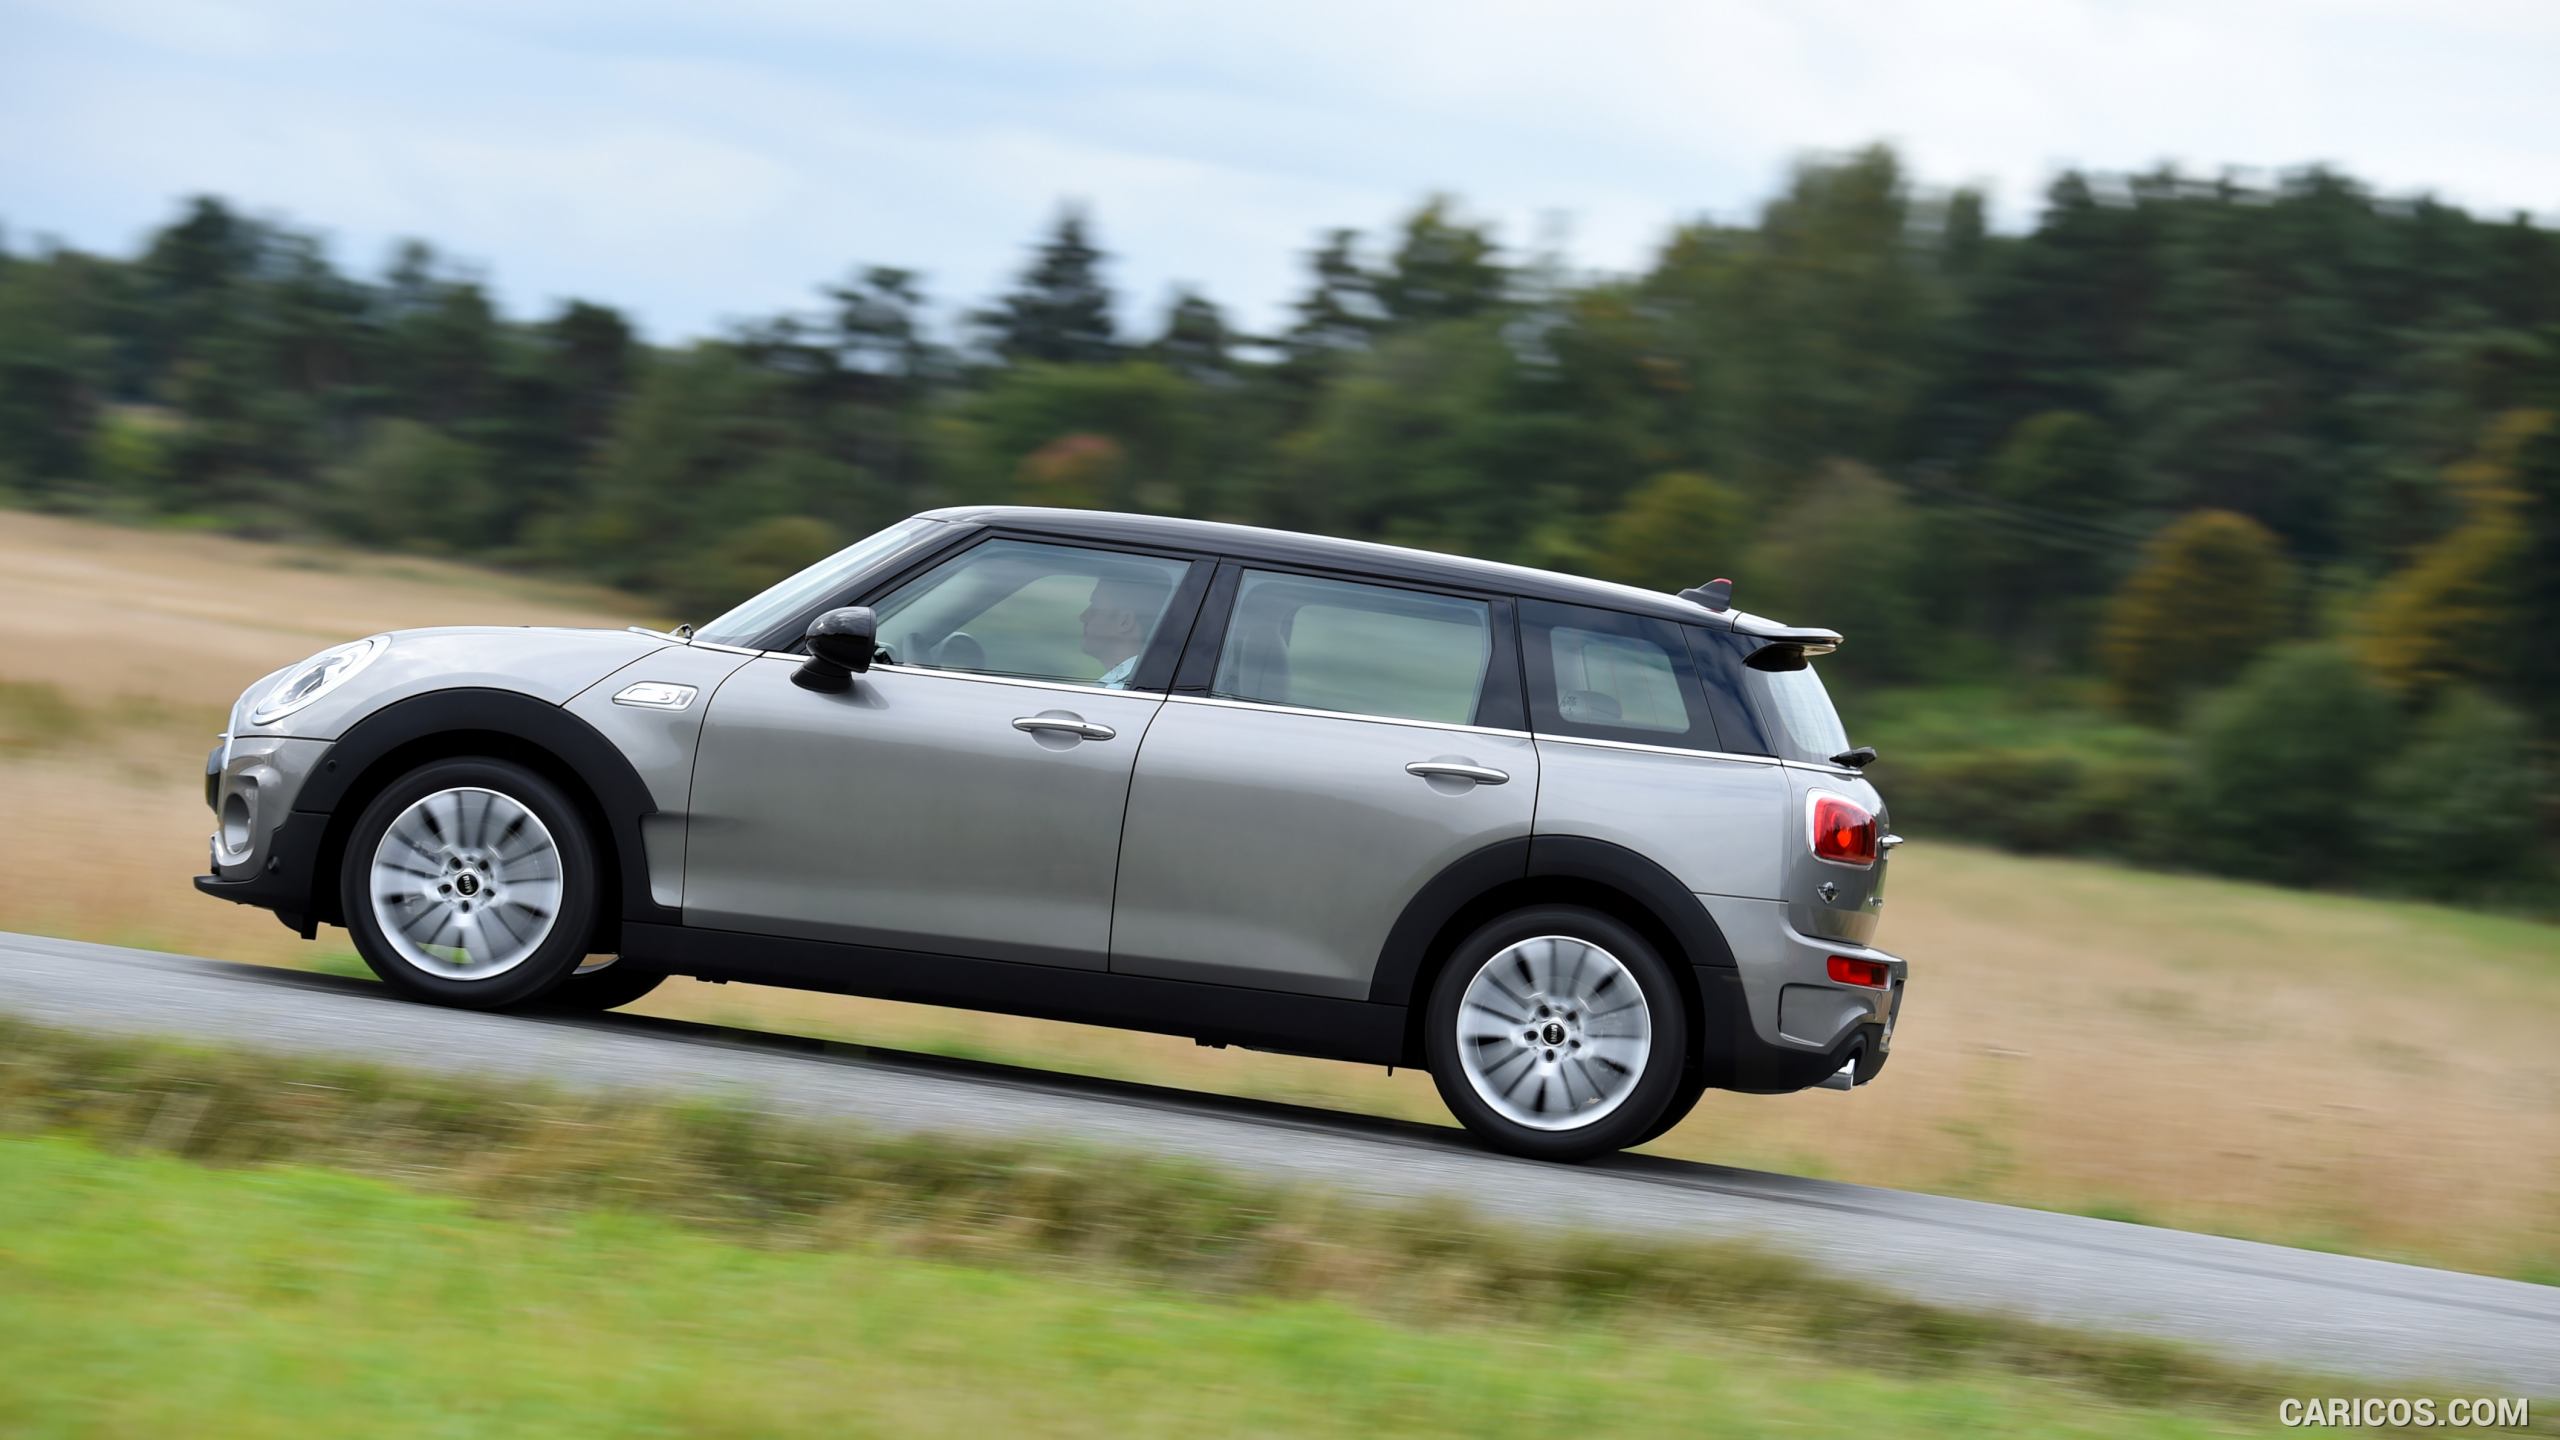 2016 MINI Cooper S Clubman in Metallic Melting Silver - Side, #147 of 380